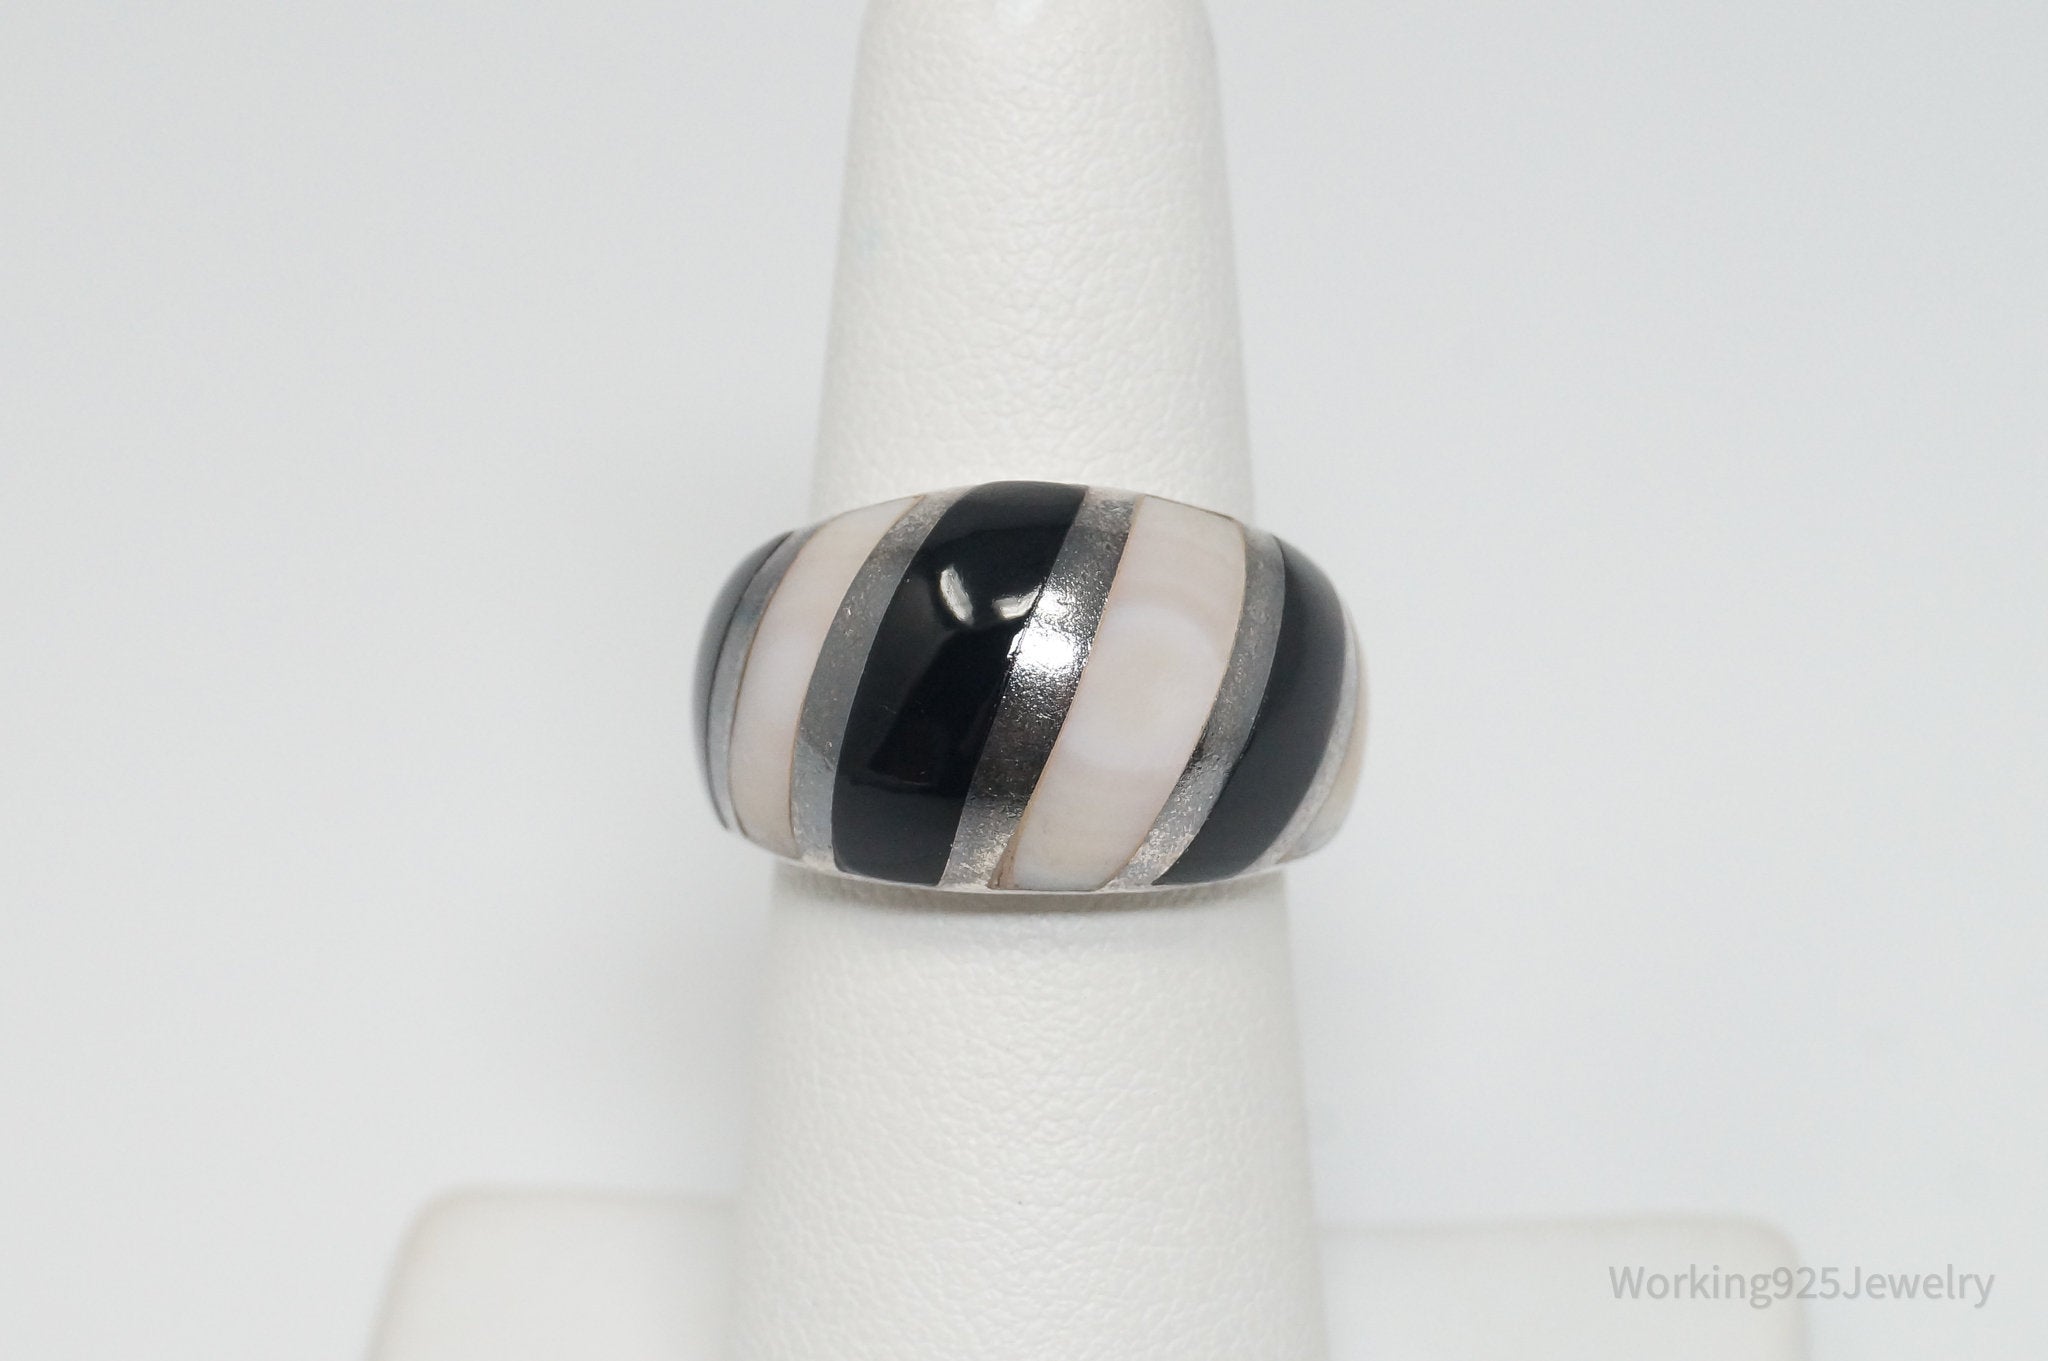 Vintage Mother Of Pearl Black Onyx Art Deco Style Sterling Silver Ring - SZ 5.75